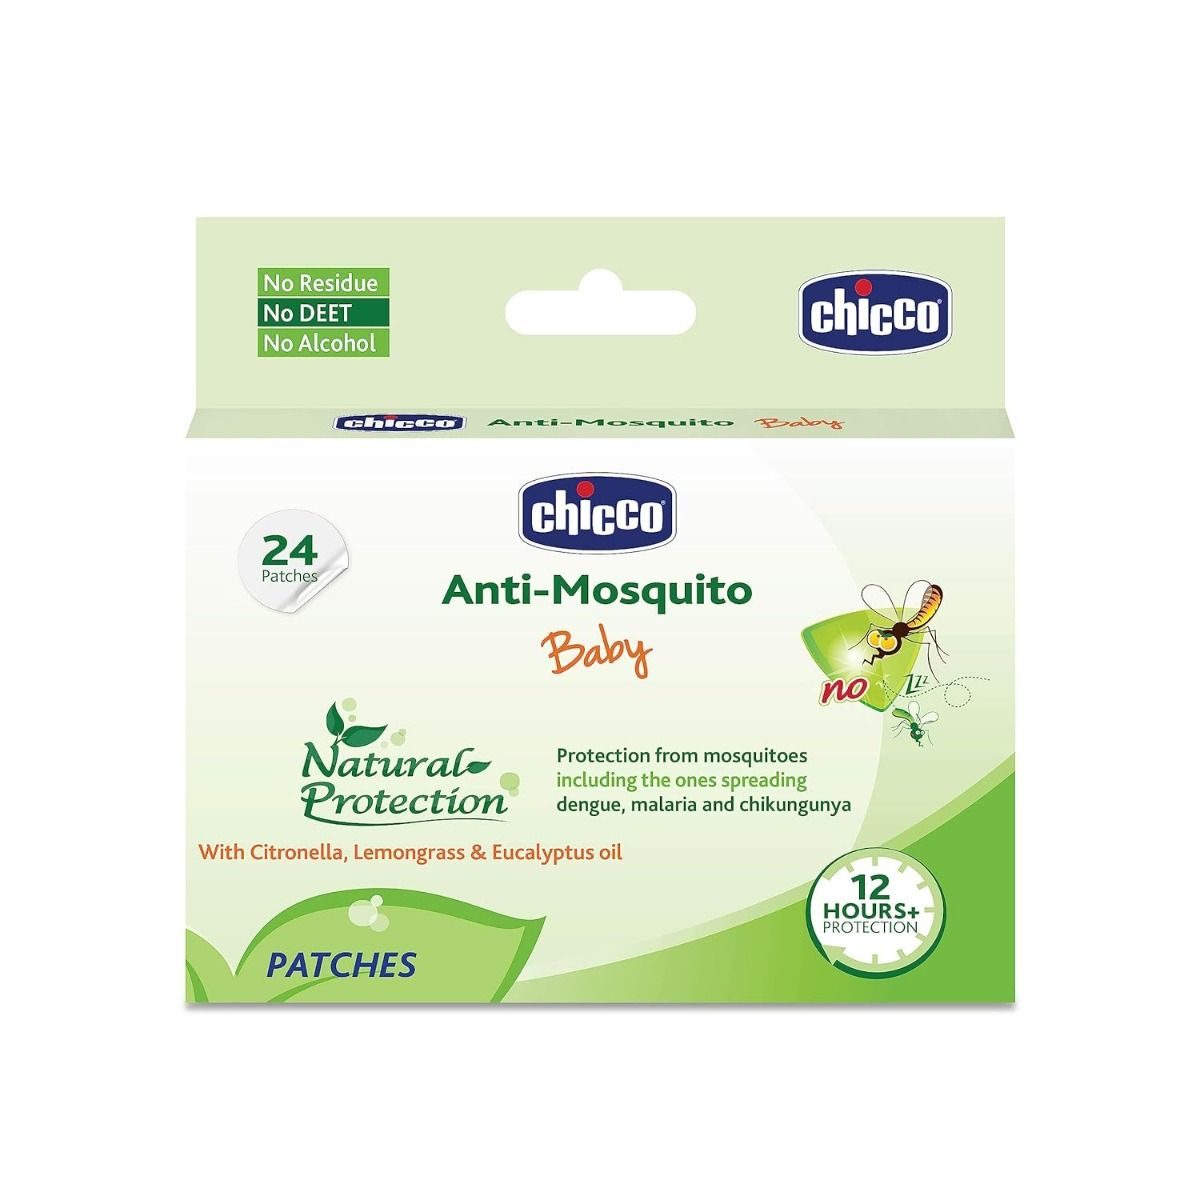 Buy Chicco Anti-Mosquito Baby Patches, 24 Count Online